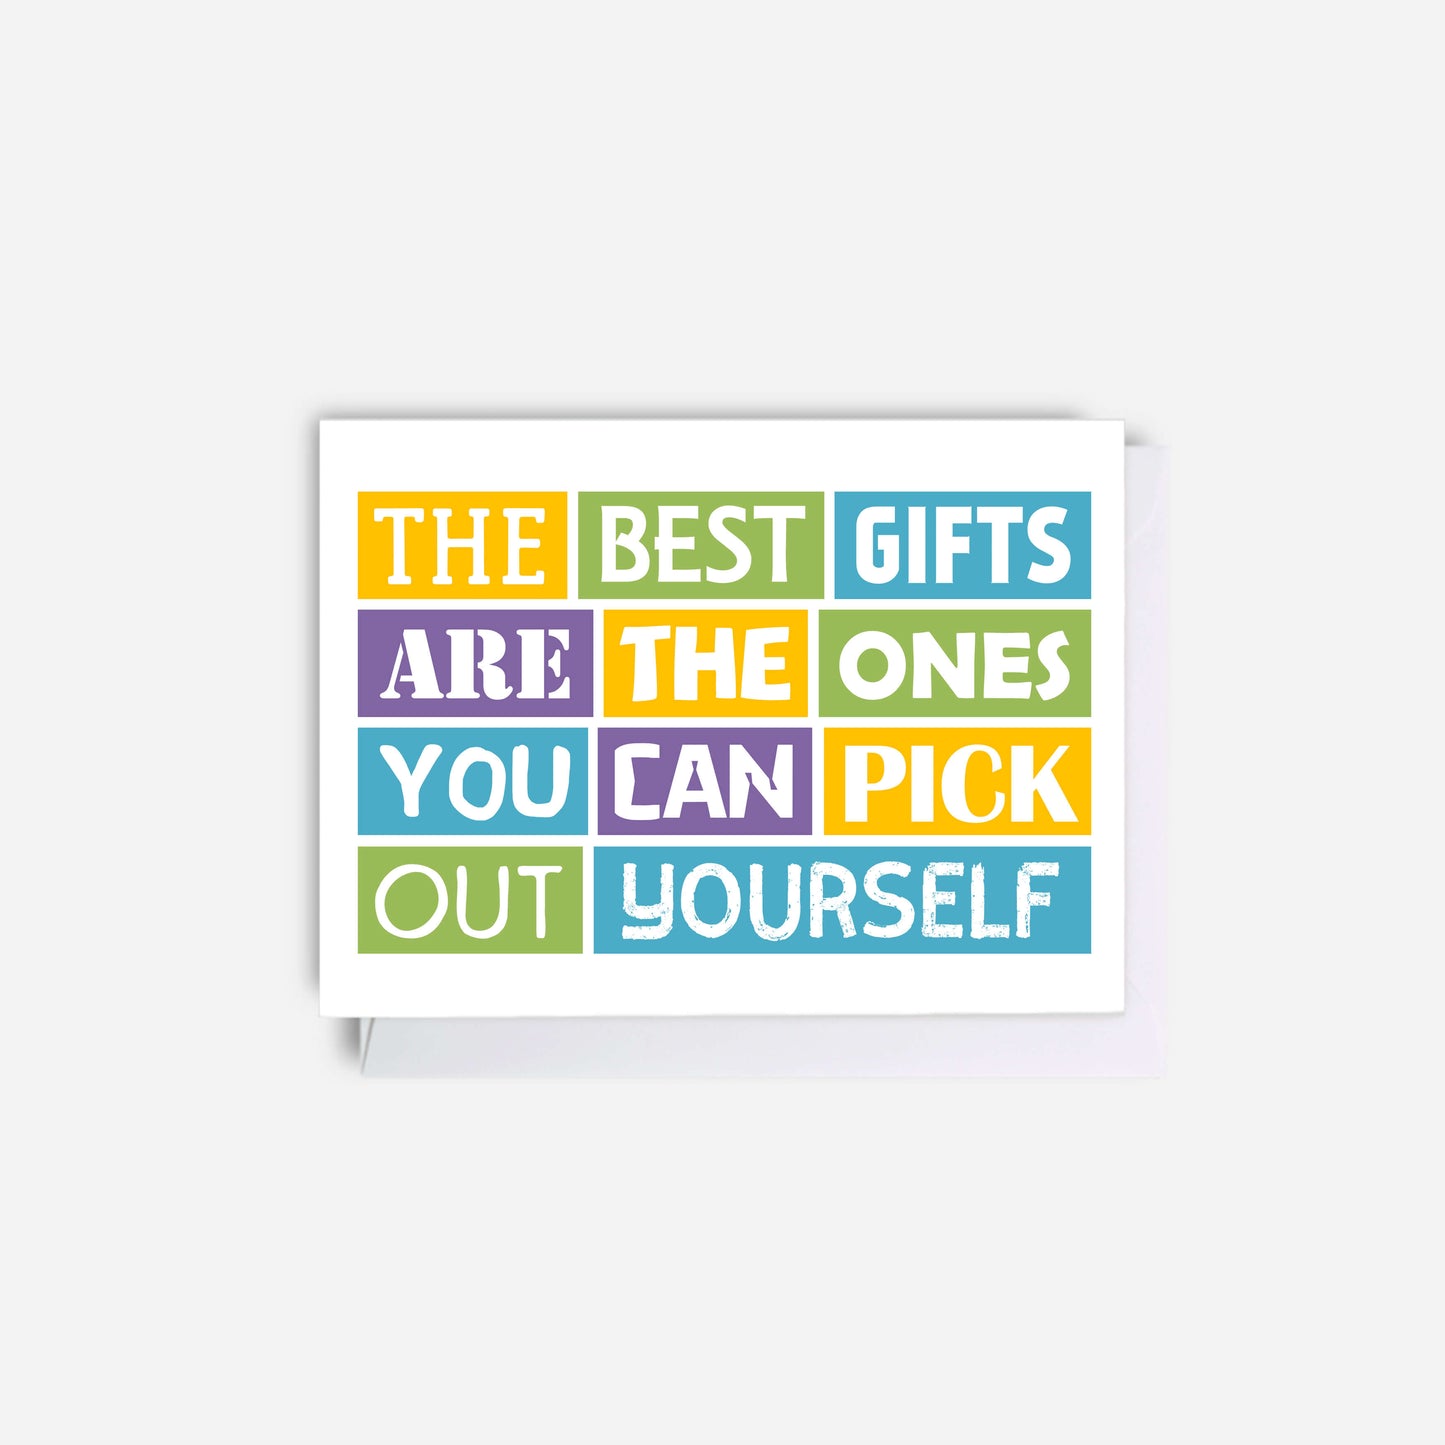 Giftcard Envelope by SixElevenCreations. Reads The best gifts are the ones you can pick out yourself. Product Code SES0014A7